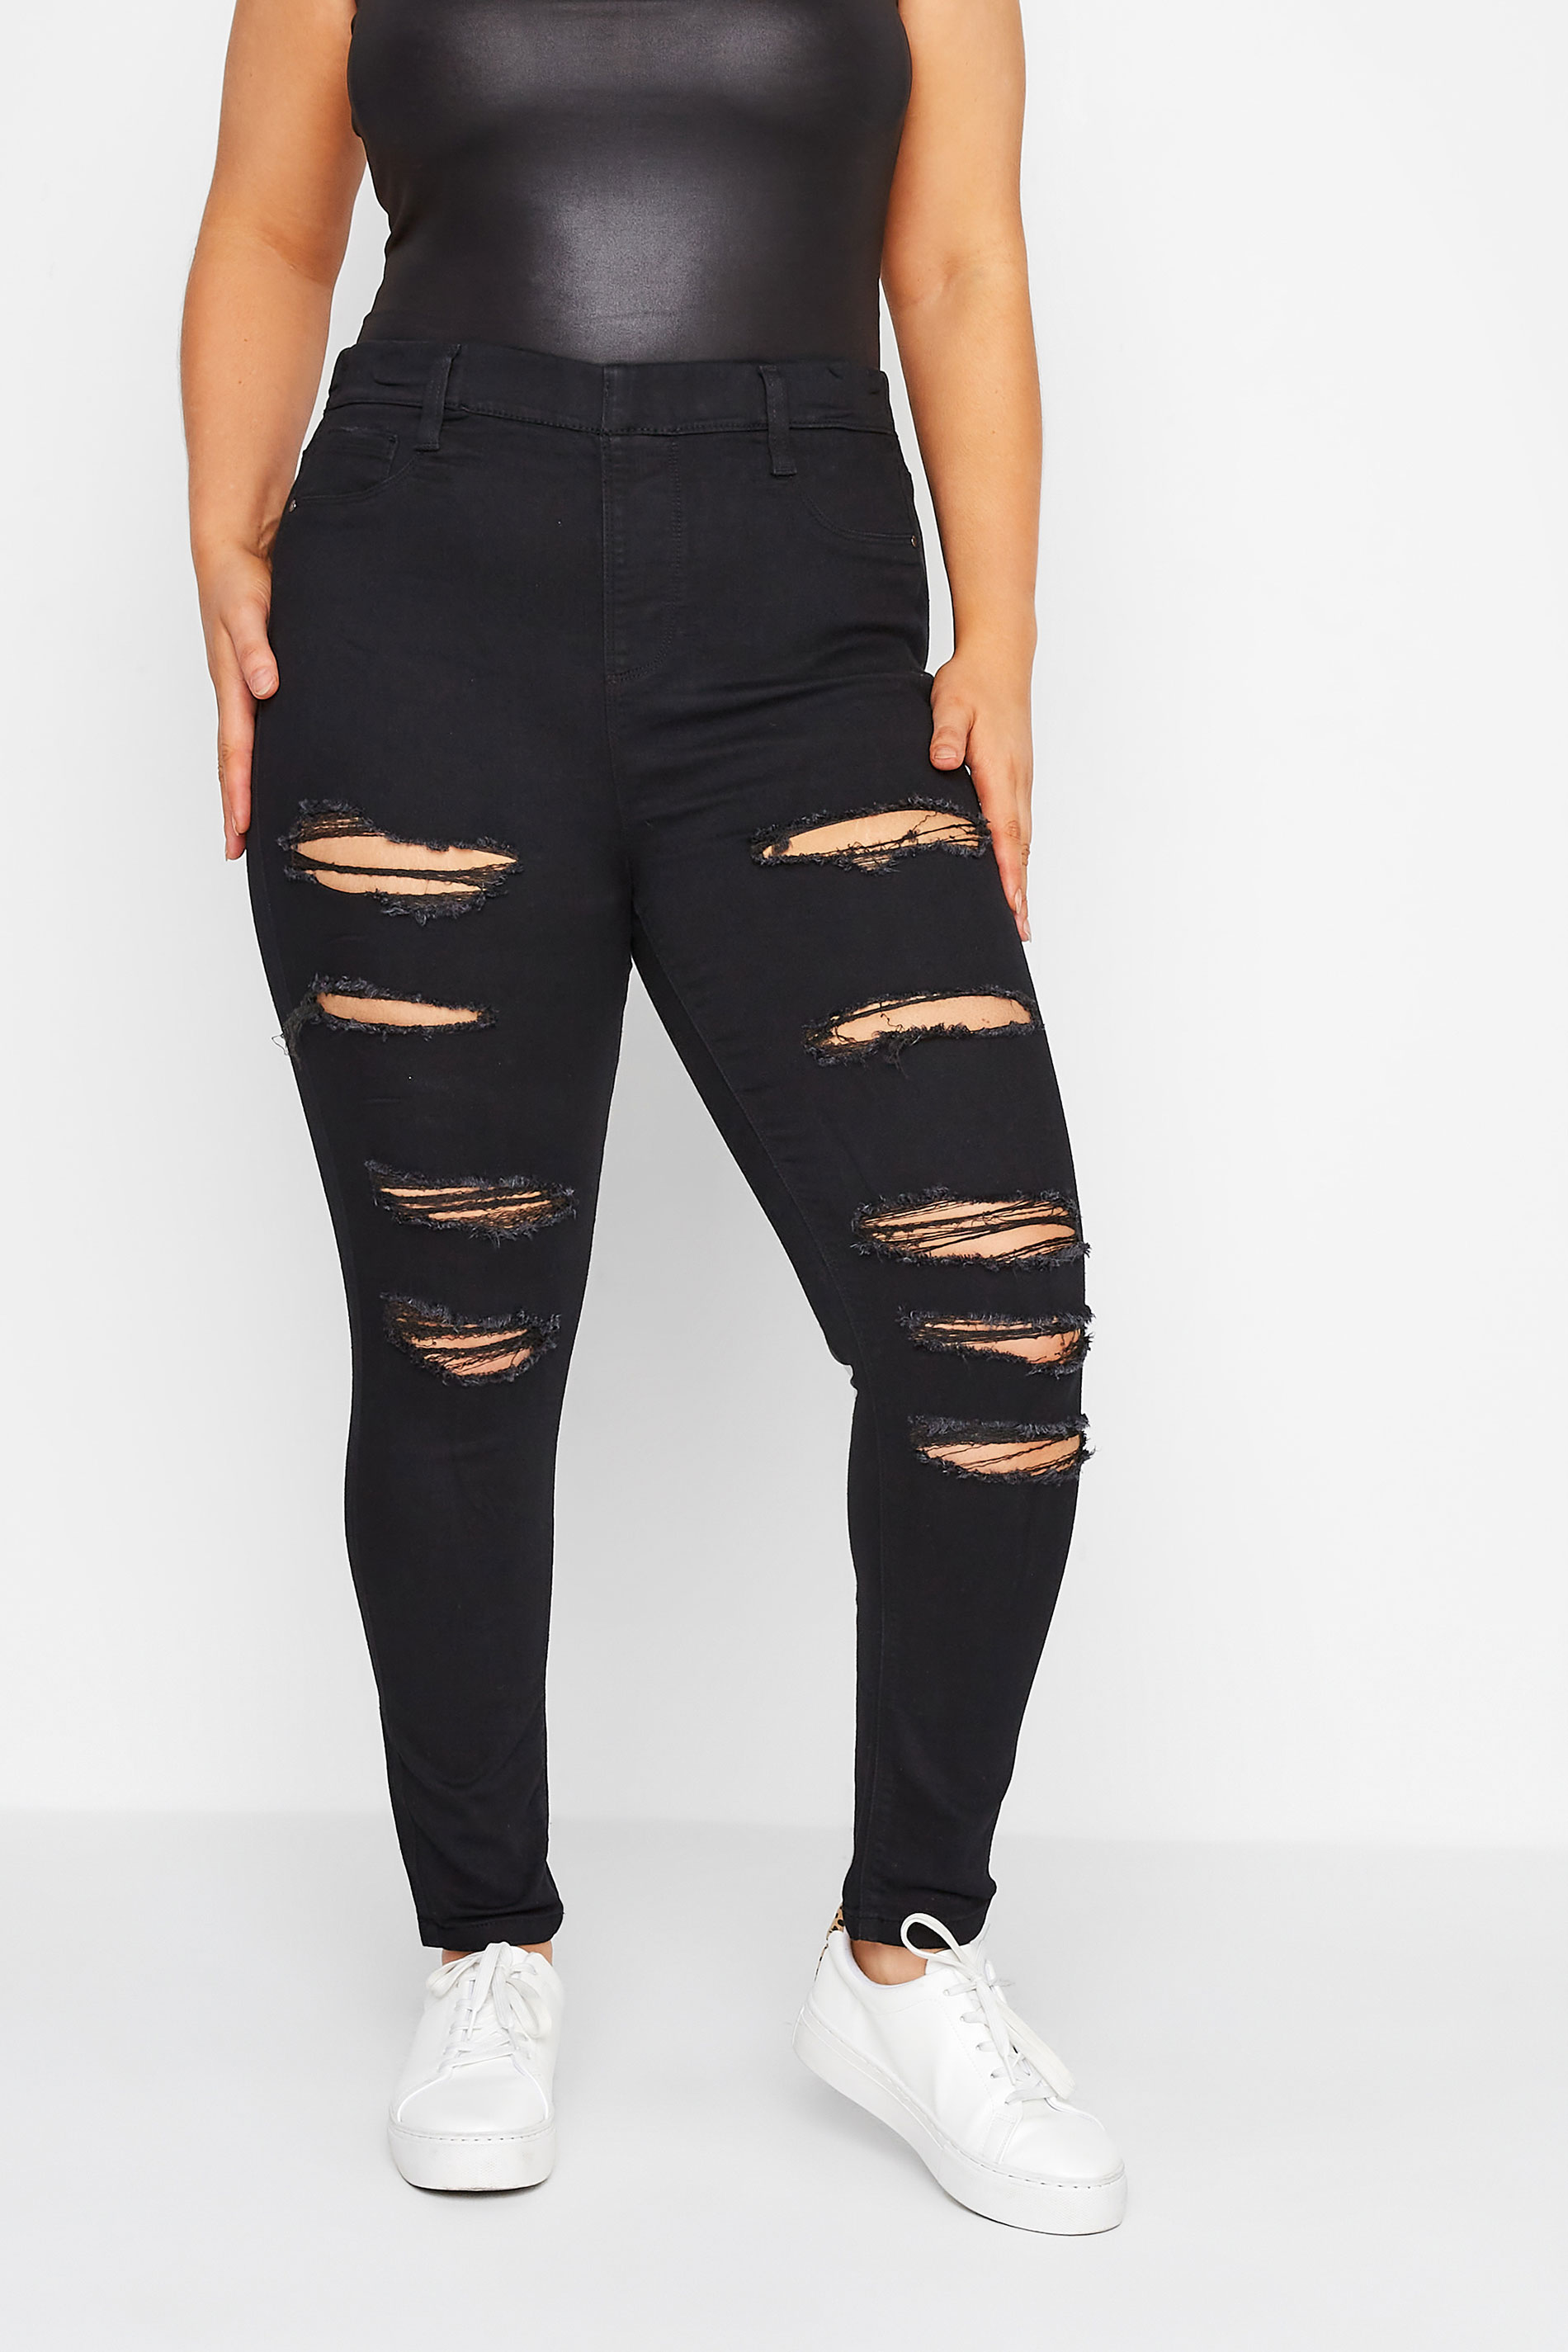 Plus Size Black Ripped GRACE Jeggings | Yours Clothing 1